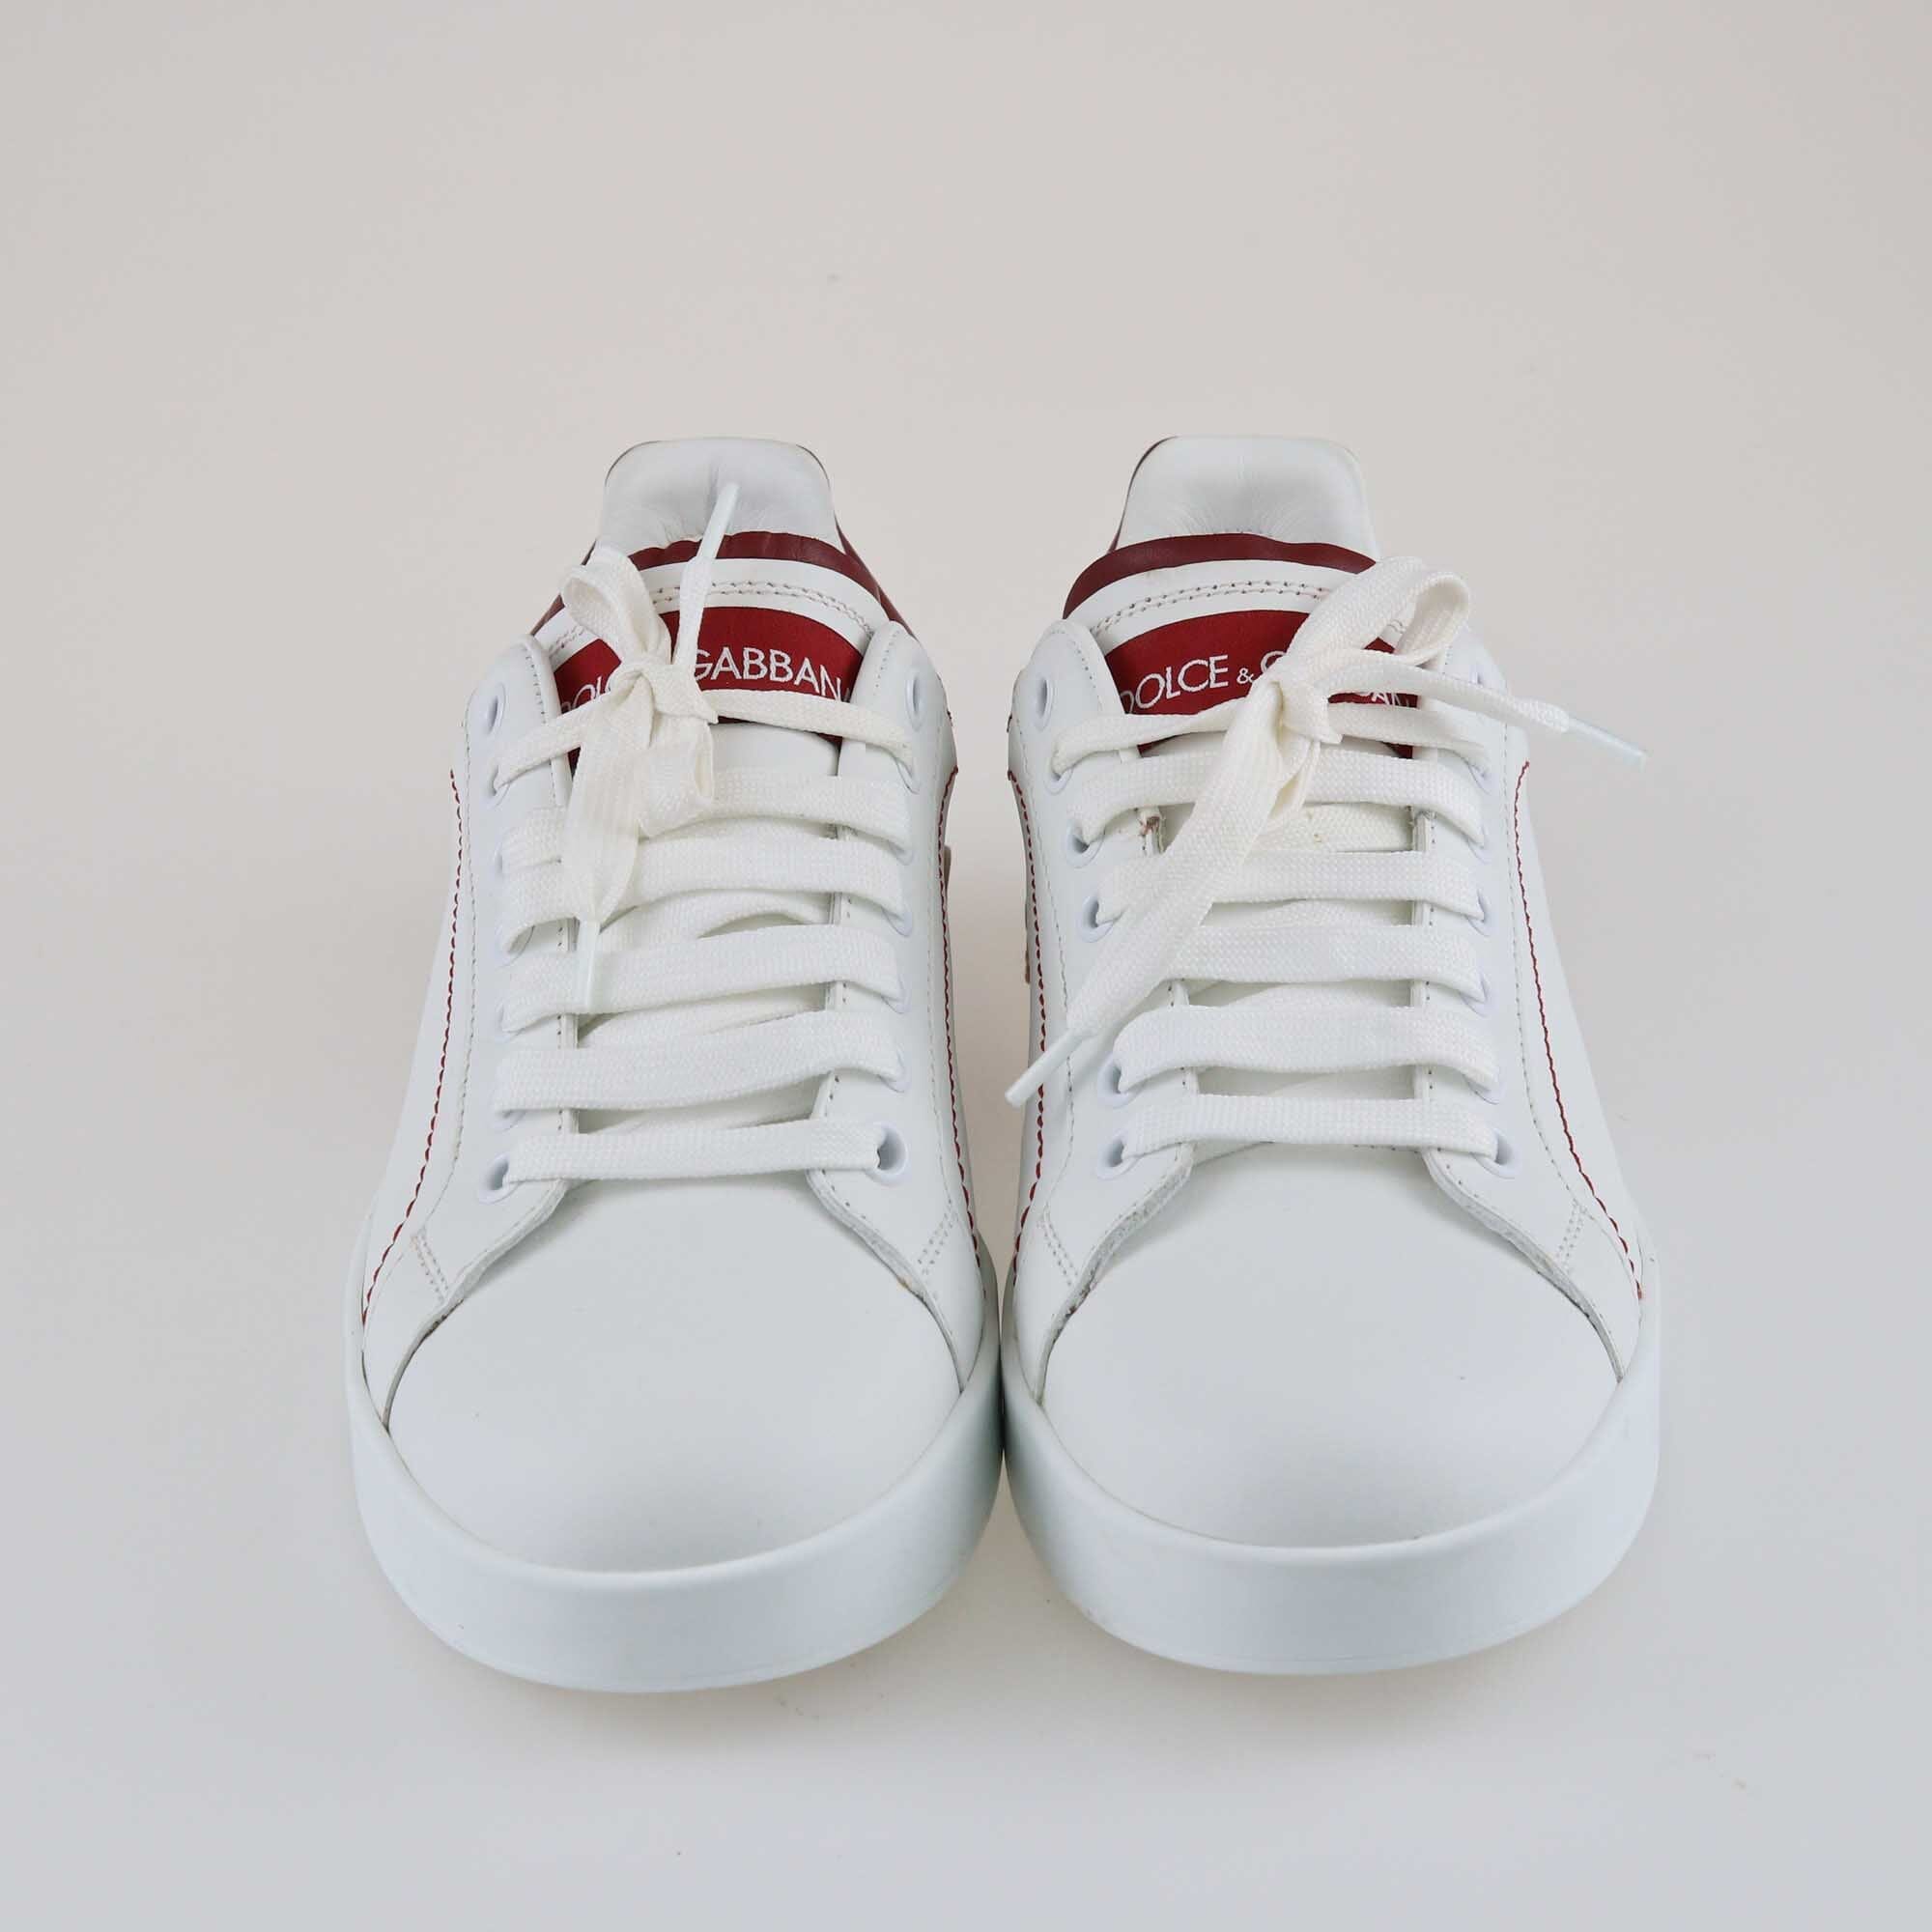 Dolce & Gabbana Red/White Logo Insert Lace Up Sneakers Shoes Dolce & Gabbana 